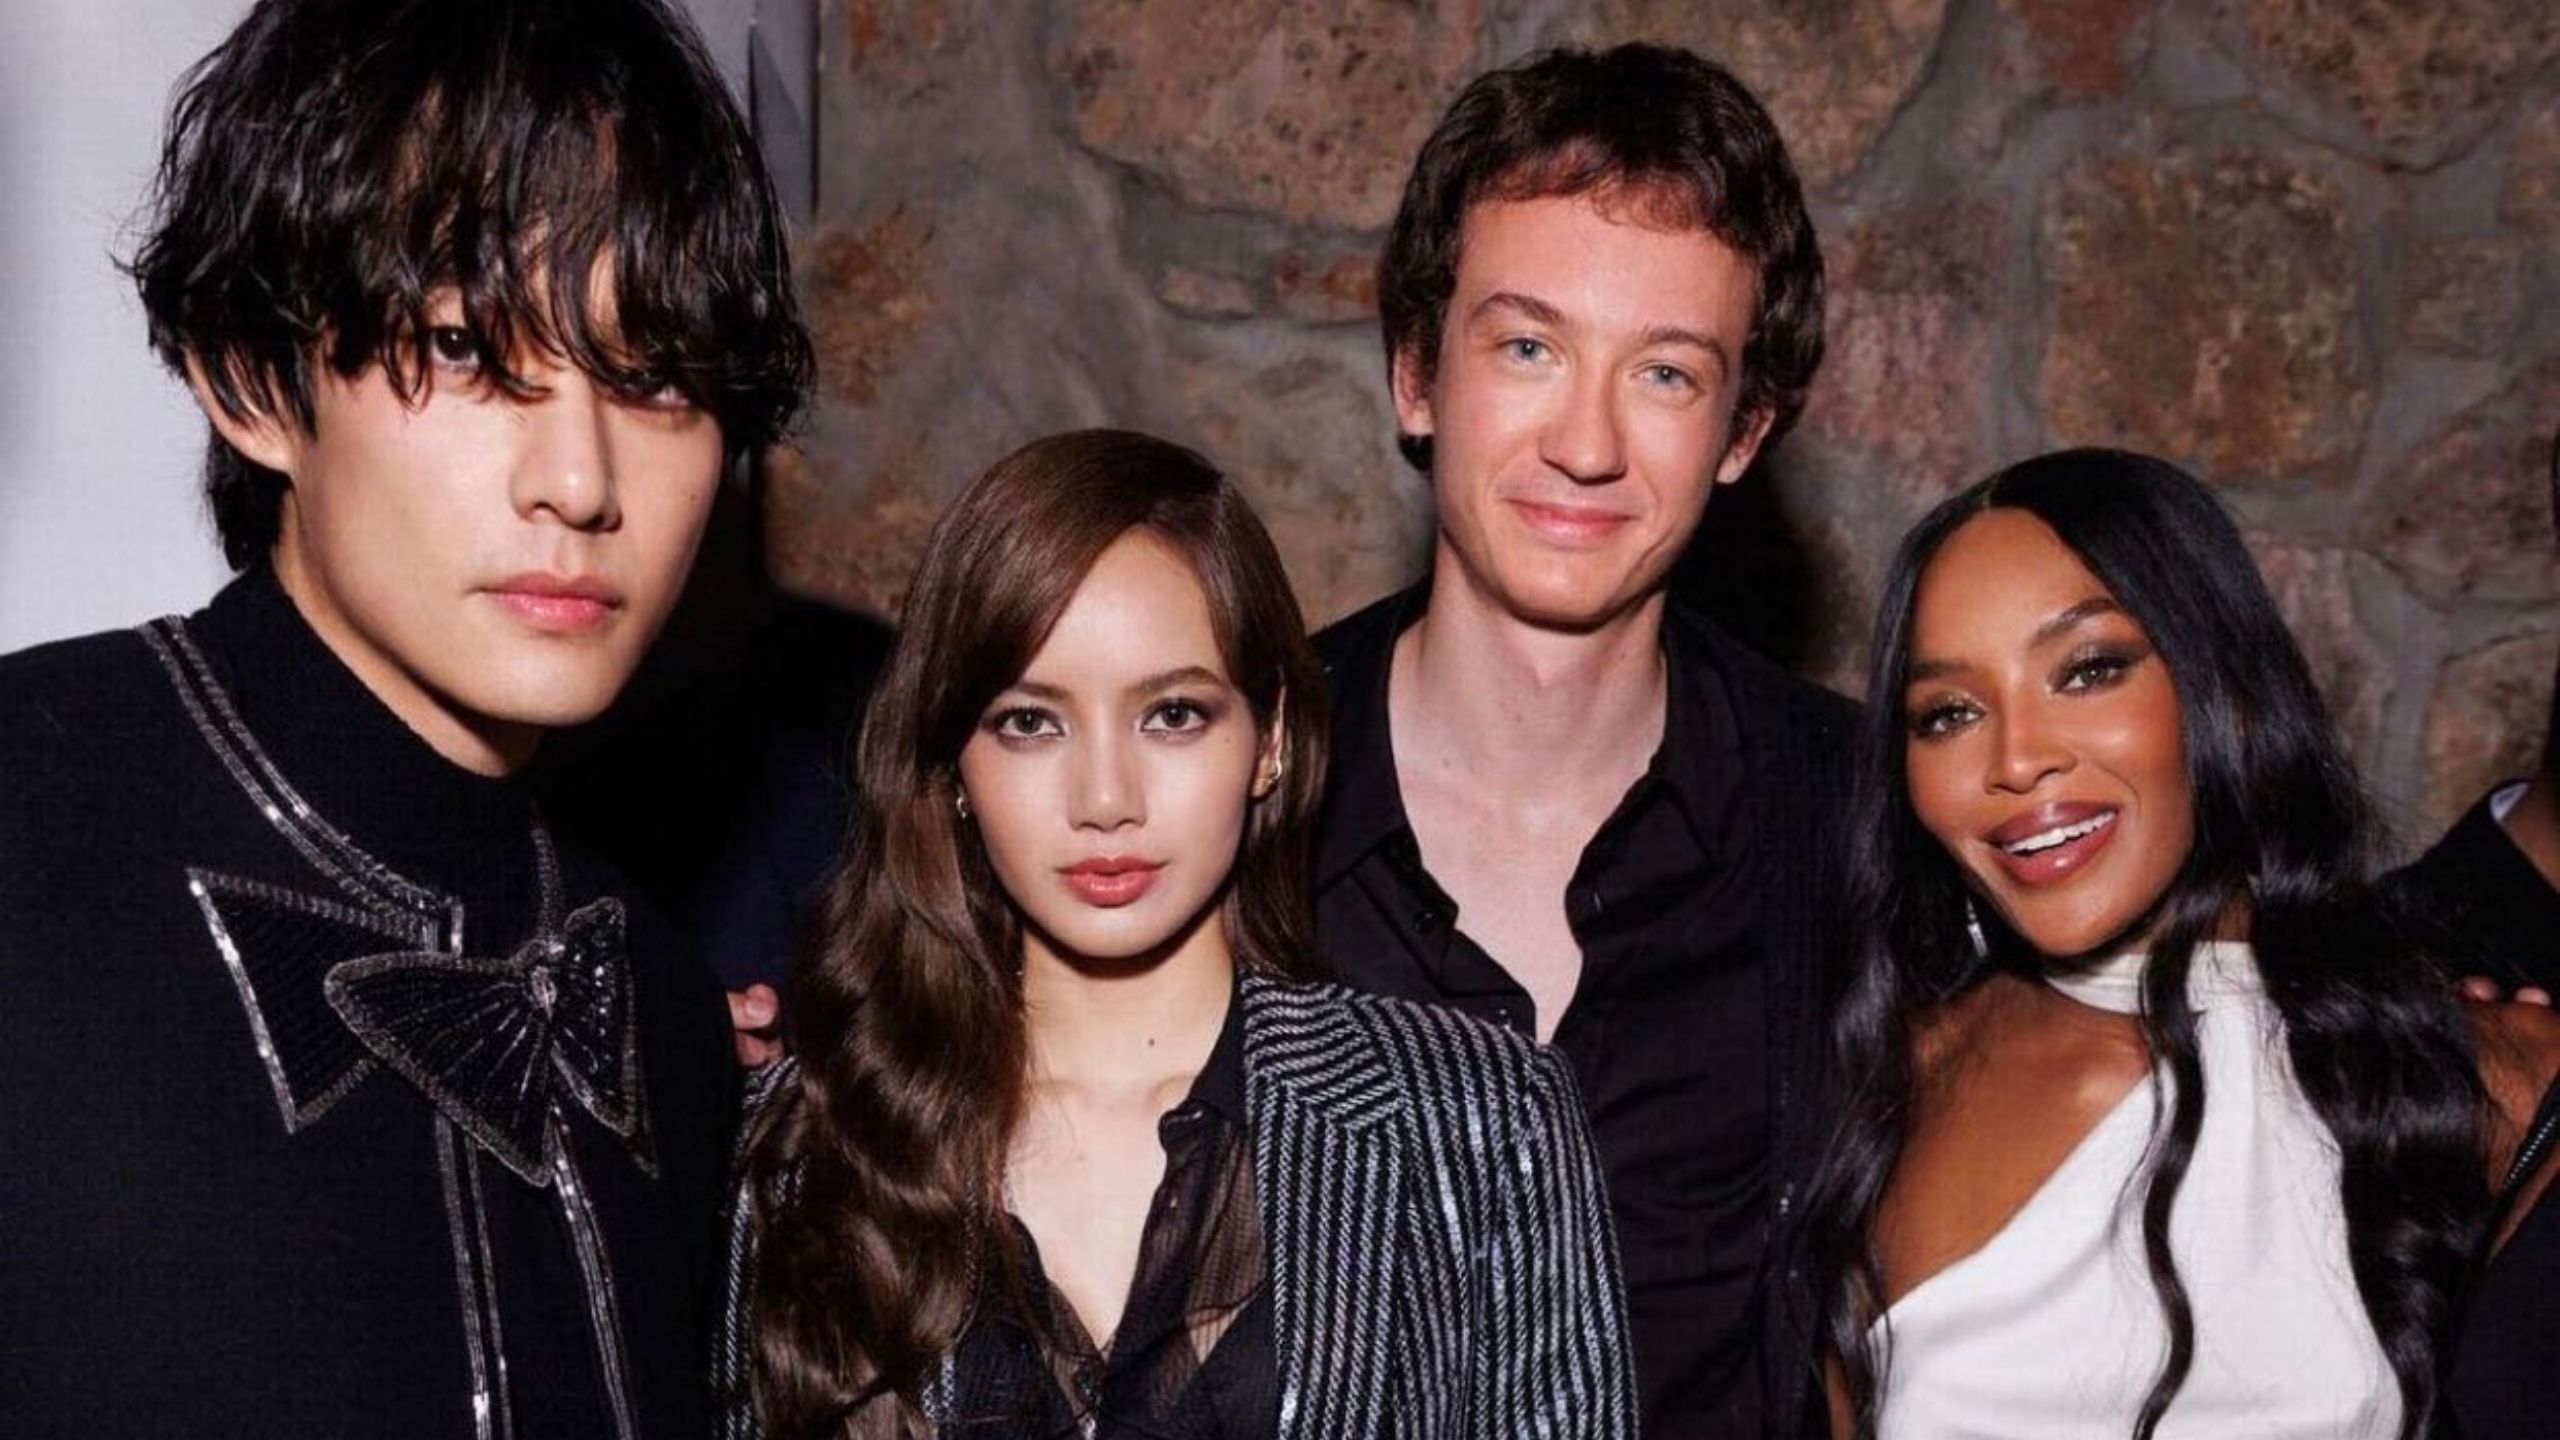 Thai media outlet reports that Frédéric Arnault joined BLACKPINK's